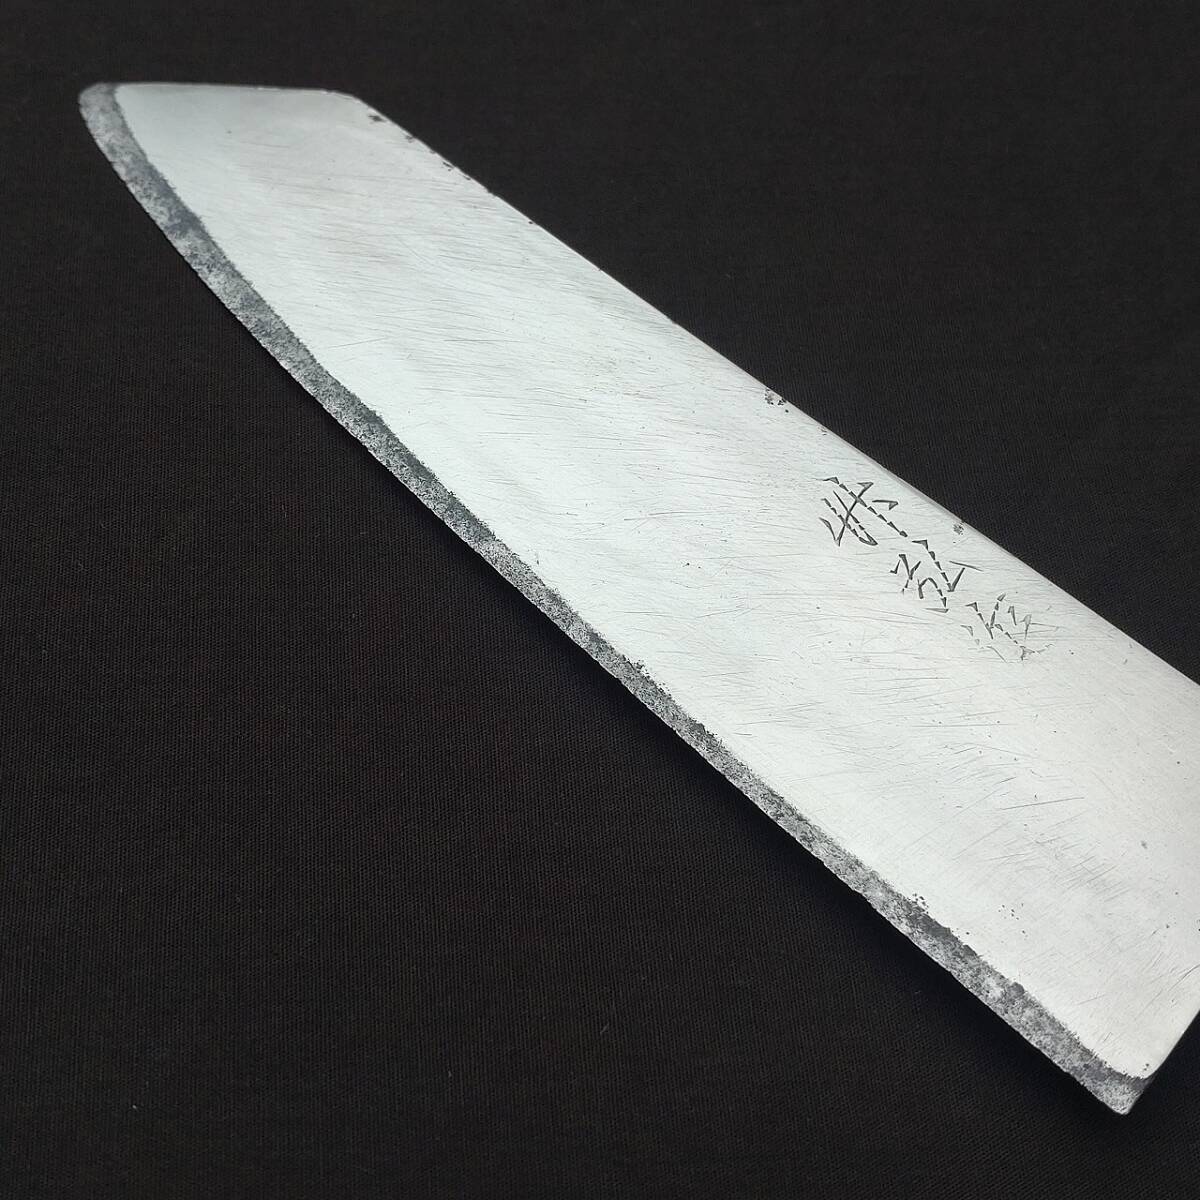  cut attaching kitchen knife culture kitchen knife bamboo . work stainless steel book@ break up included blade length approximately 160. santoku knife . number cutlery made in Japan Japanese kitchen knife Kiritsuke knife [4919]